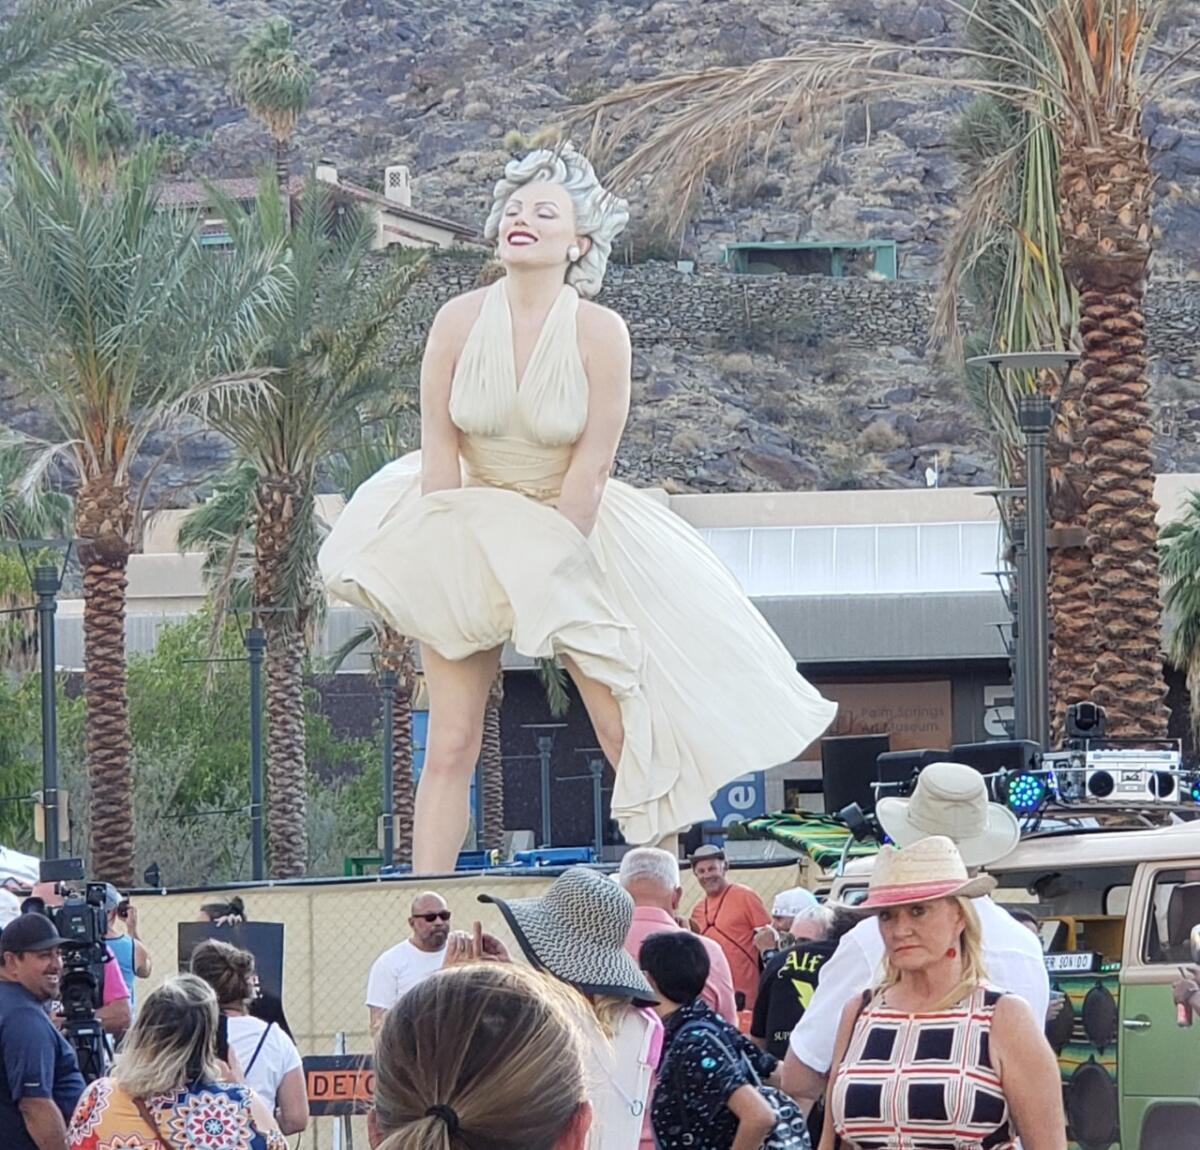 It's all about her when you are in Palm Springs #MarilynMonroe 💖 # palmsprings #palmspringspride #palmspringsstyle #pink #prettyinpink